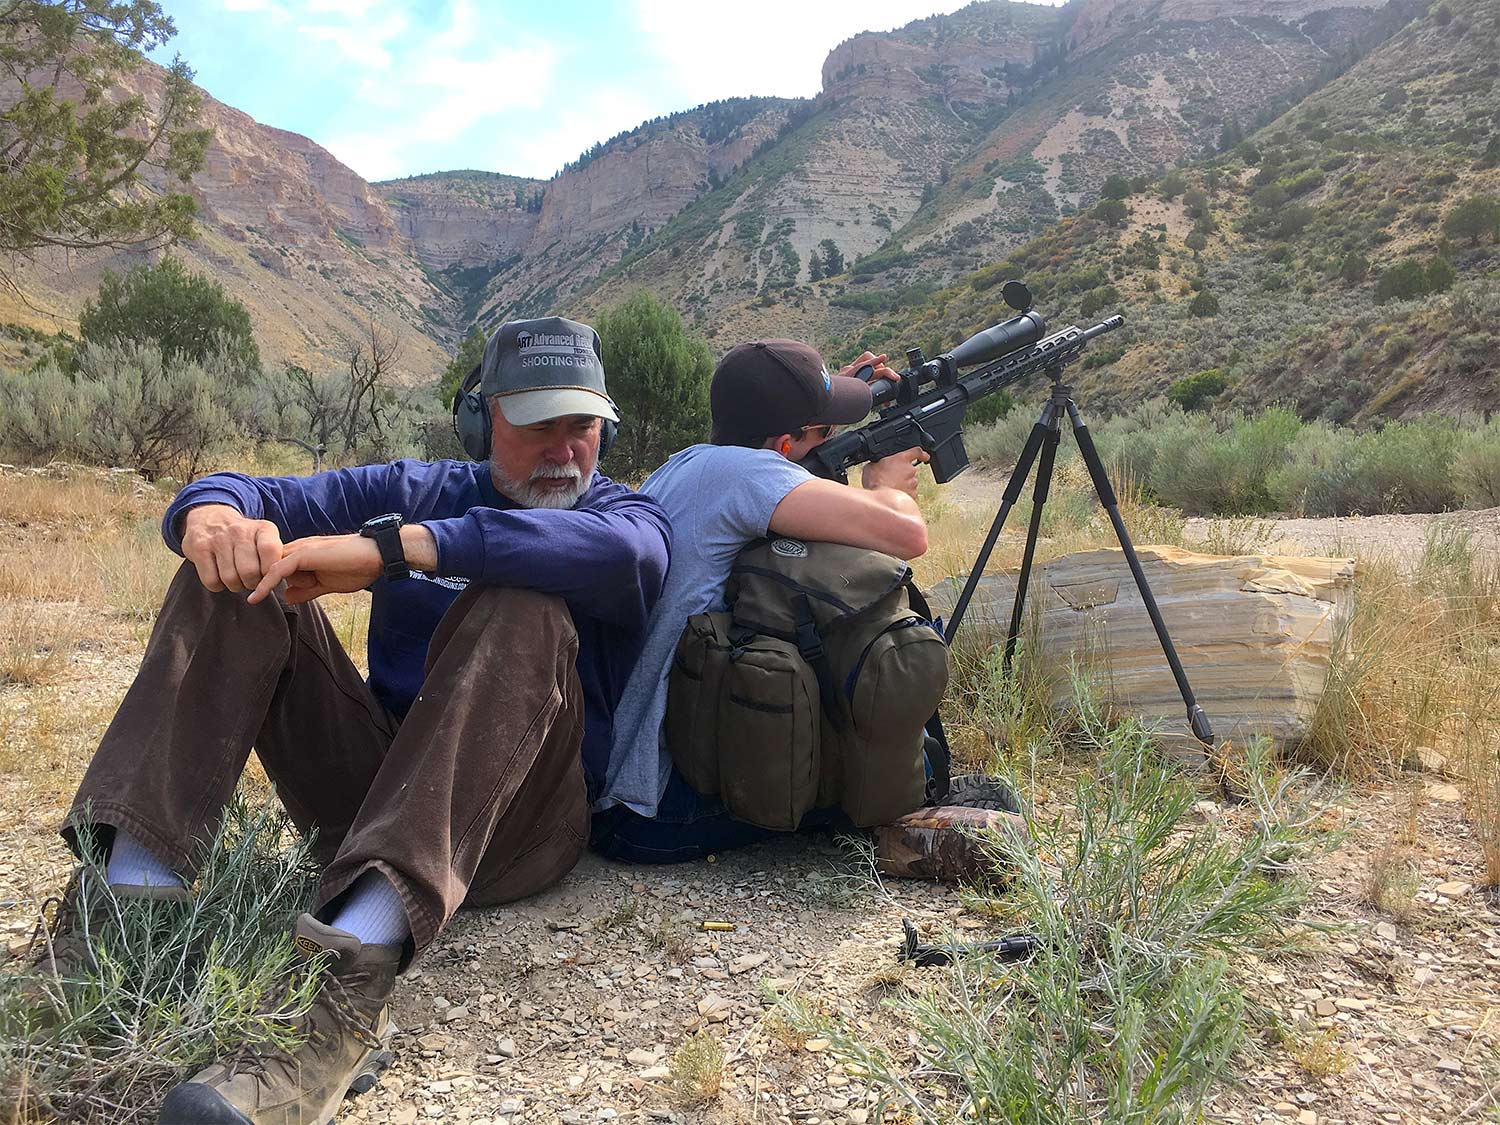 Two men sit back-to-back while one aims a rifle.